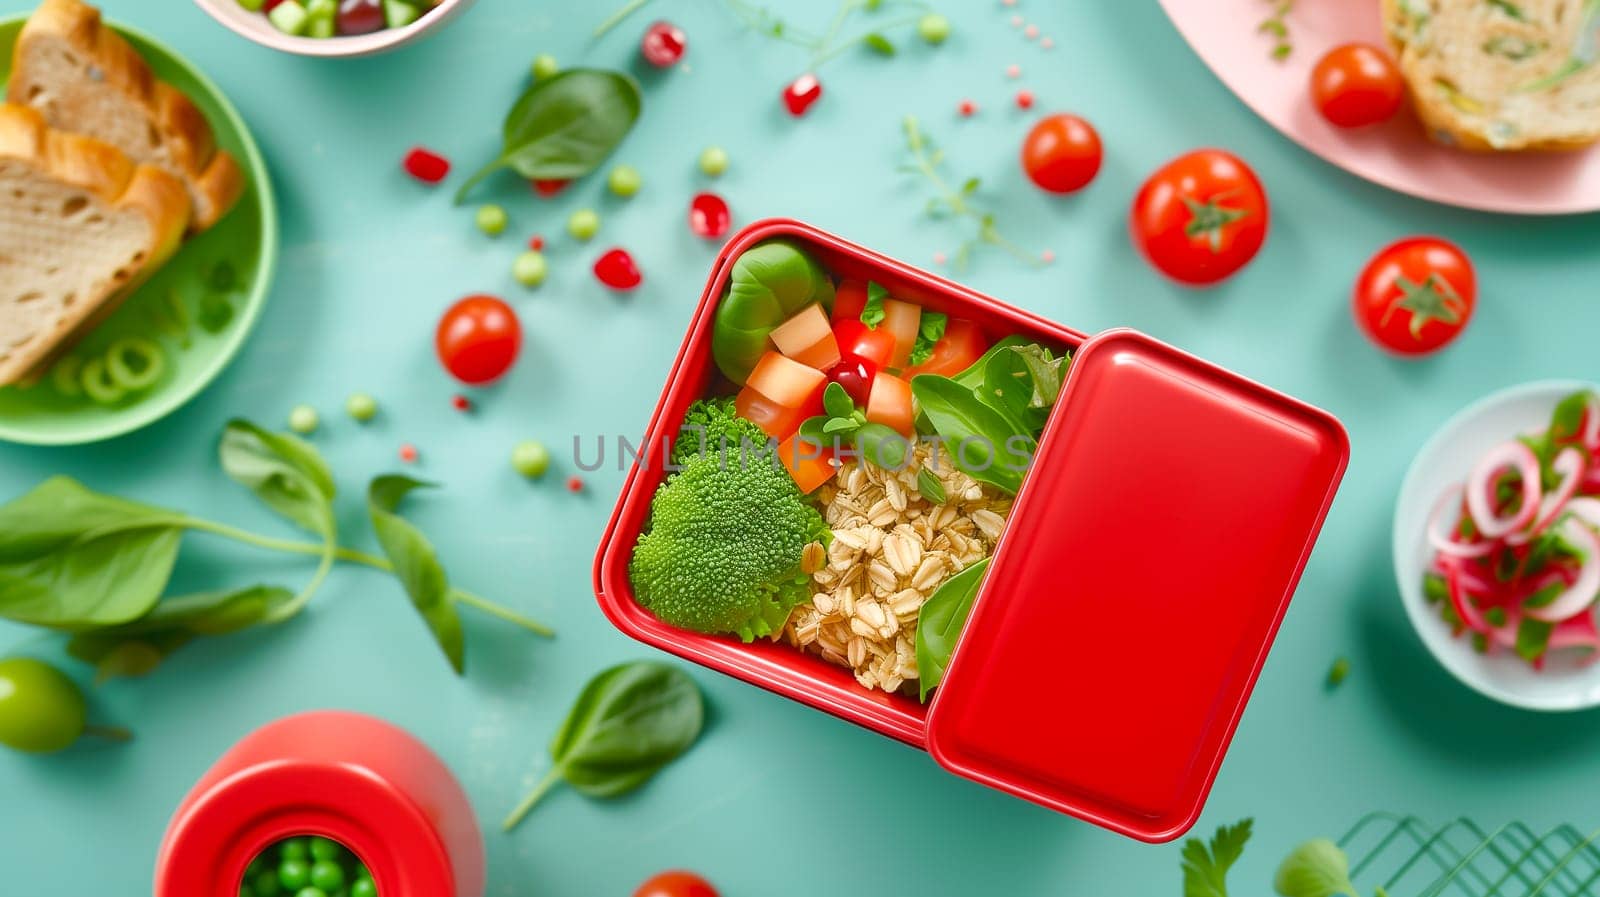 Blurred Background for Healthy Breakfast. Re Lunch box with Vegetables, Greens, Tomato, Broccoli, Spinach, Whole Wheat Bread on Blue Background, AI Generated. Flat Lay Horizontal. Organic Meal by netatsi